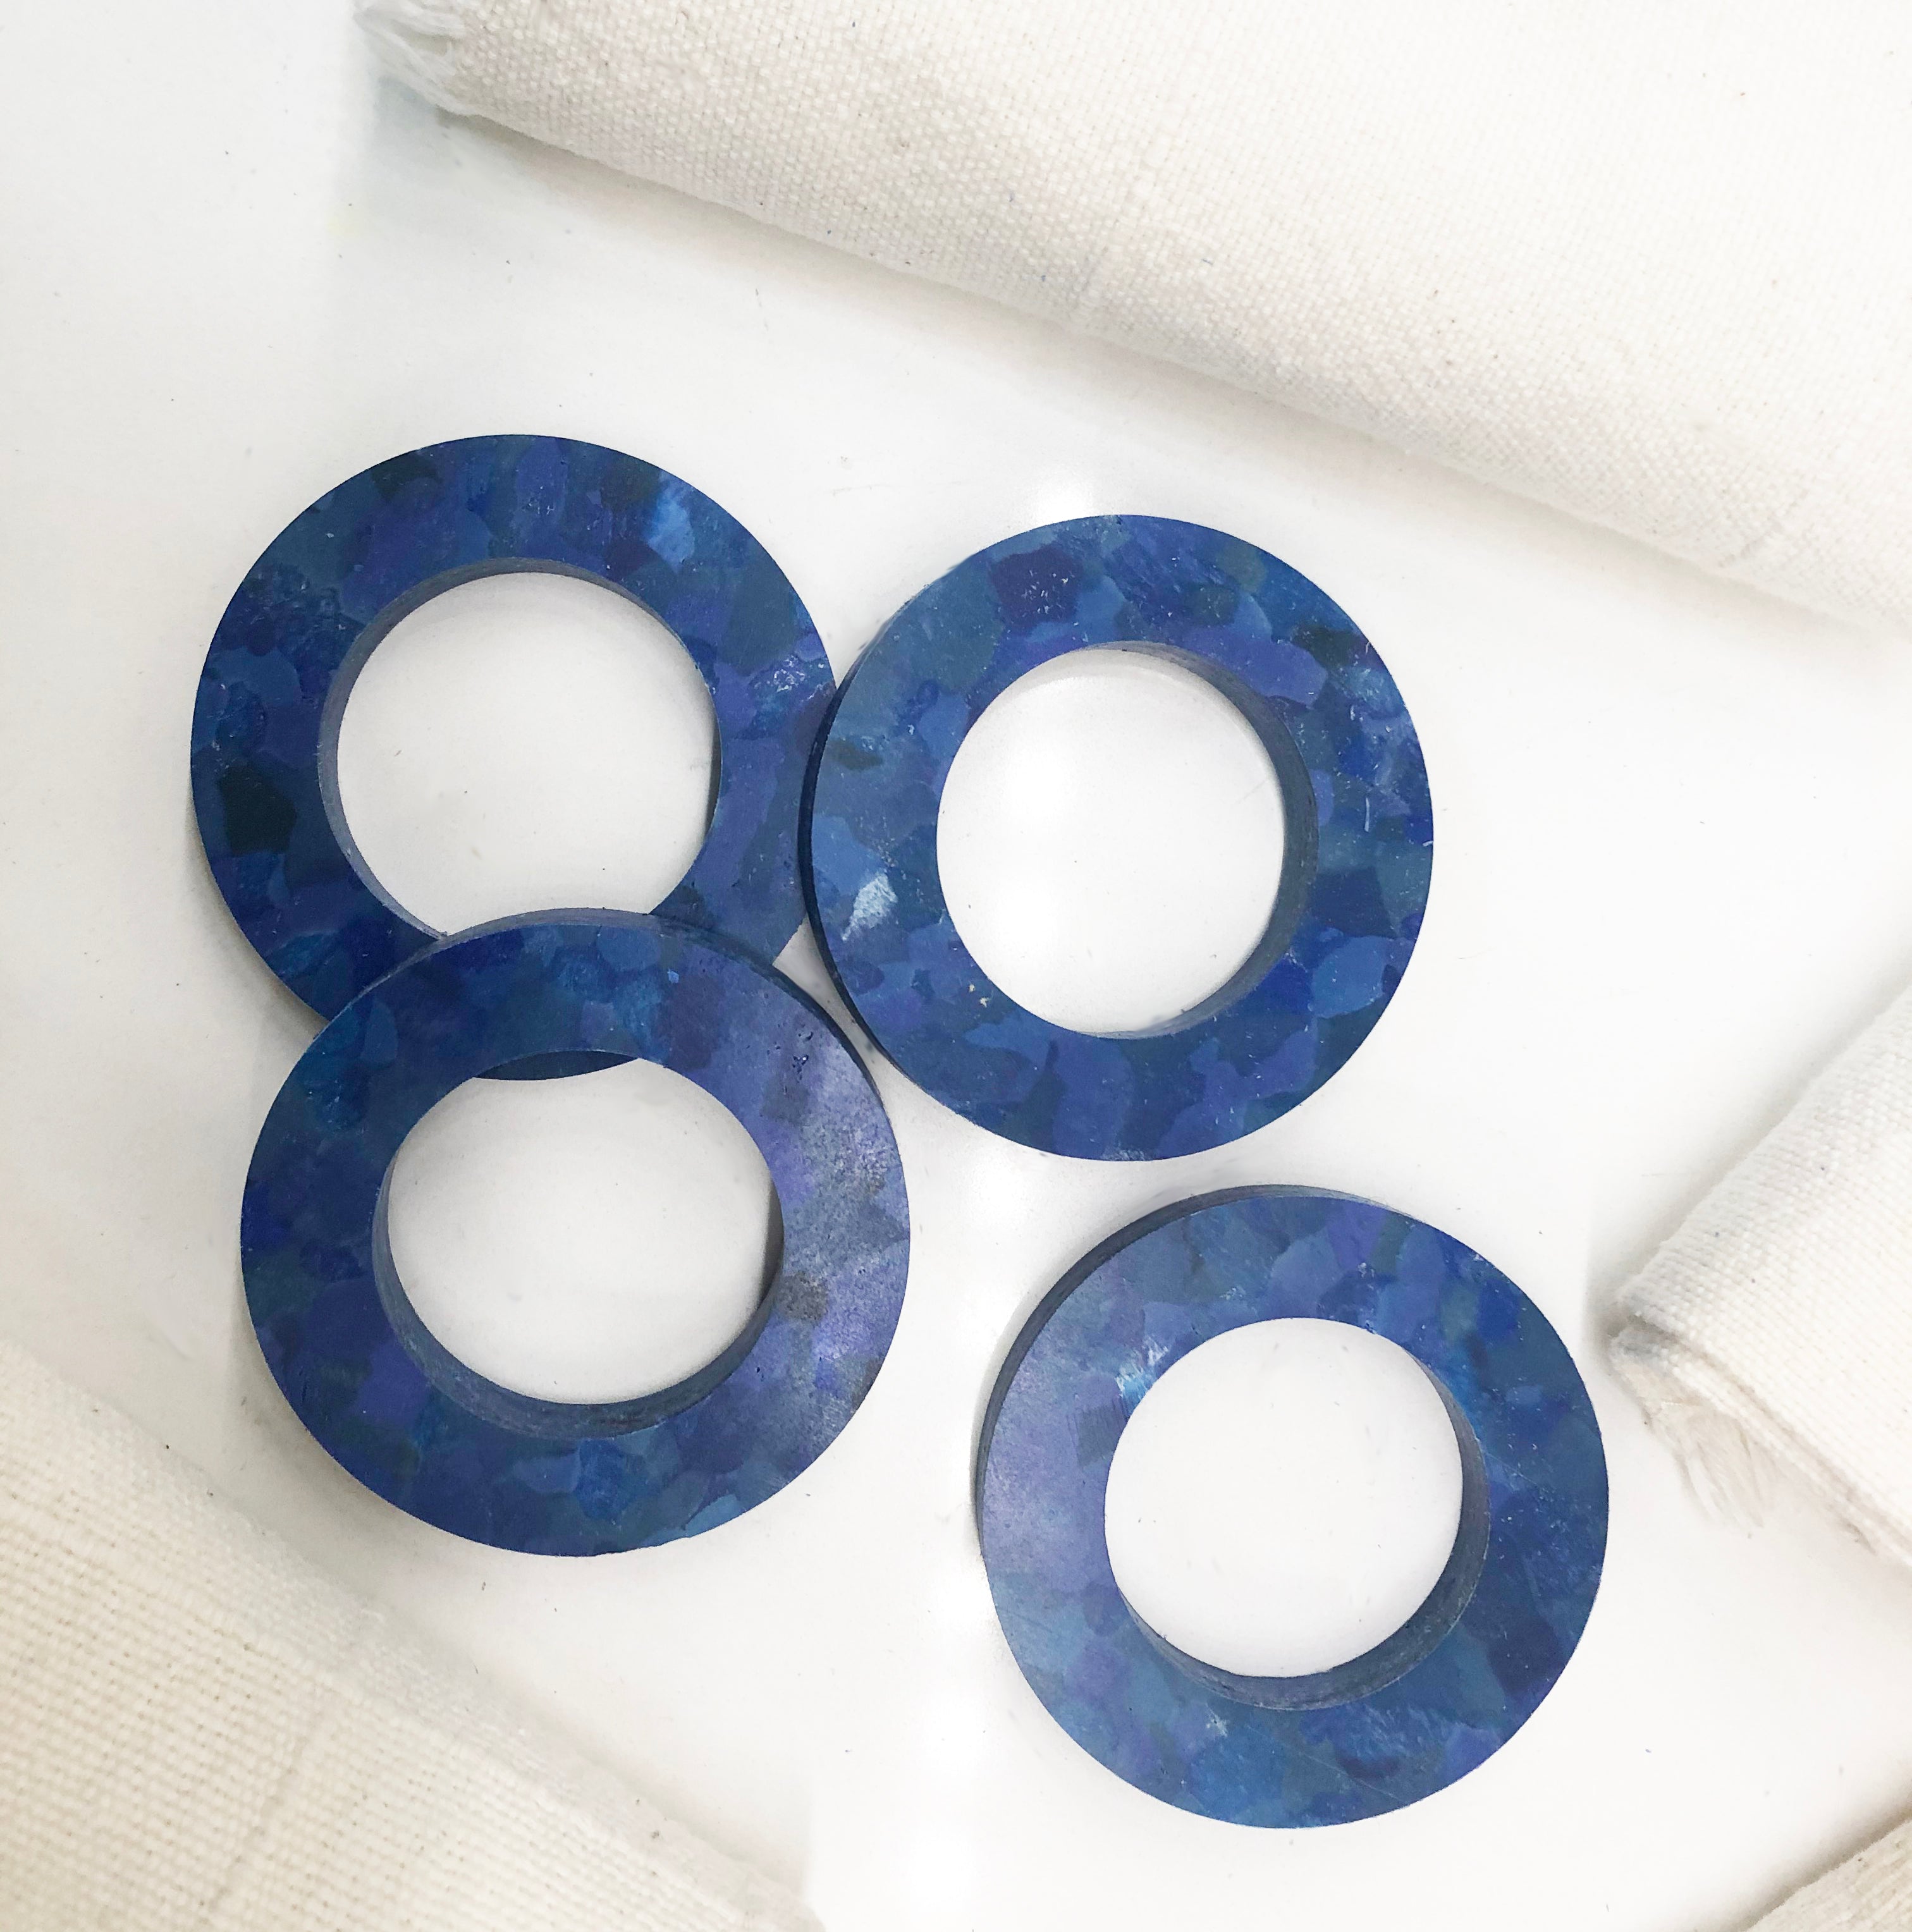 Limited Edition Round Napkin Rings - Set of 4